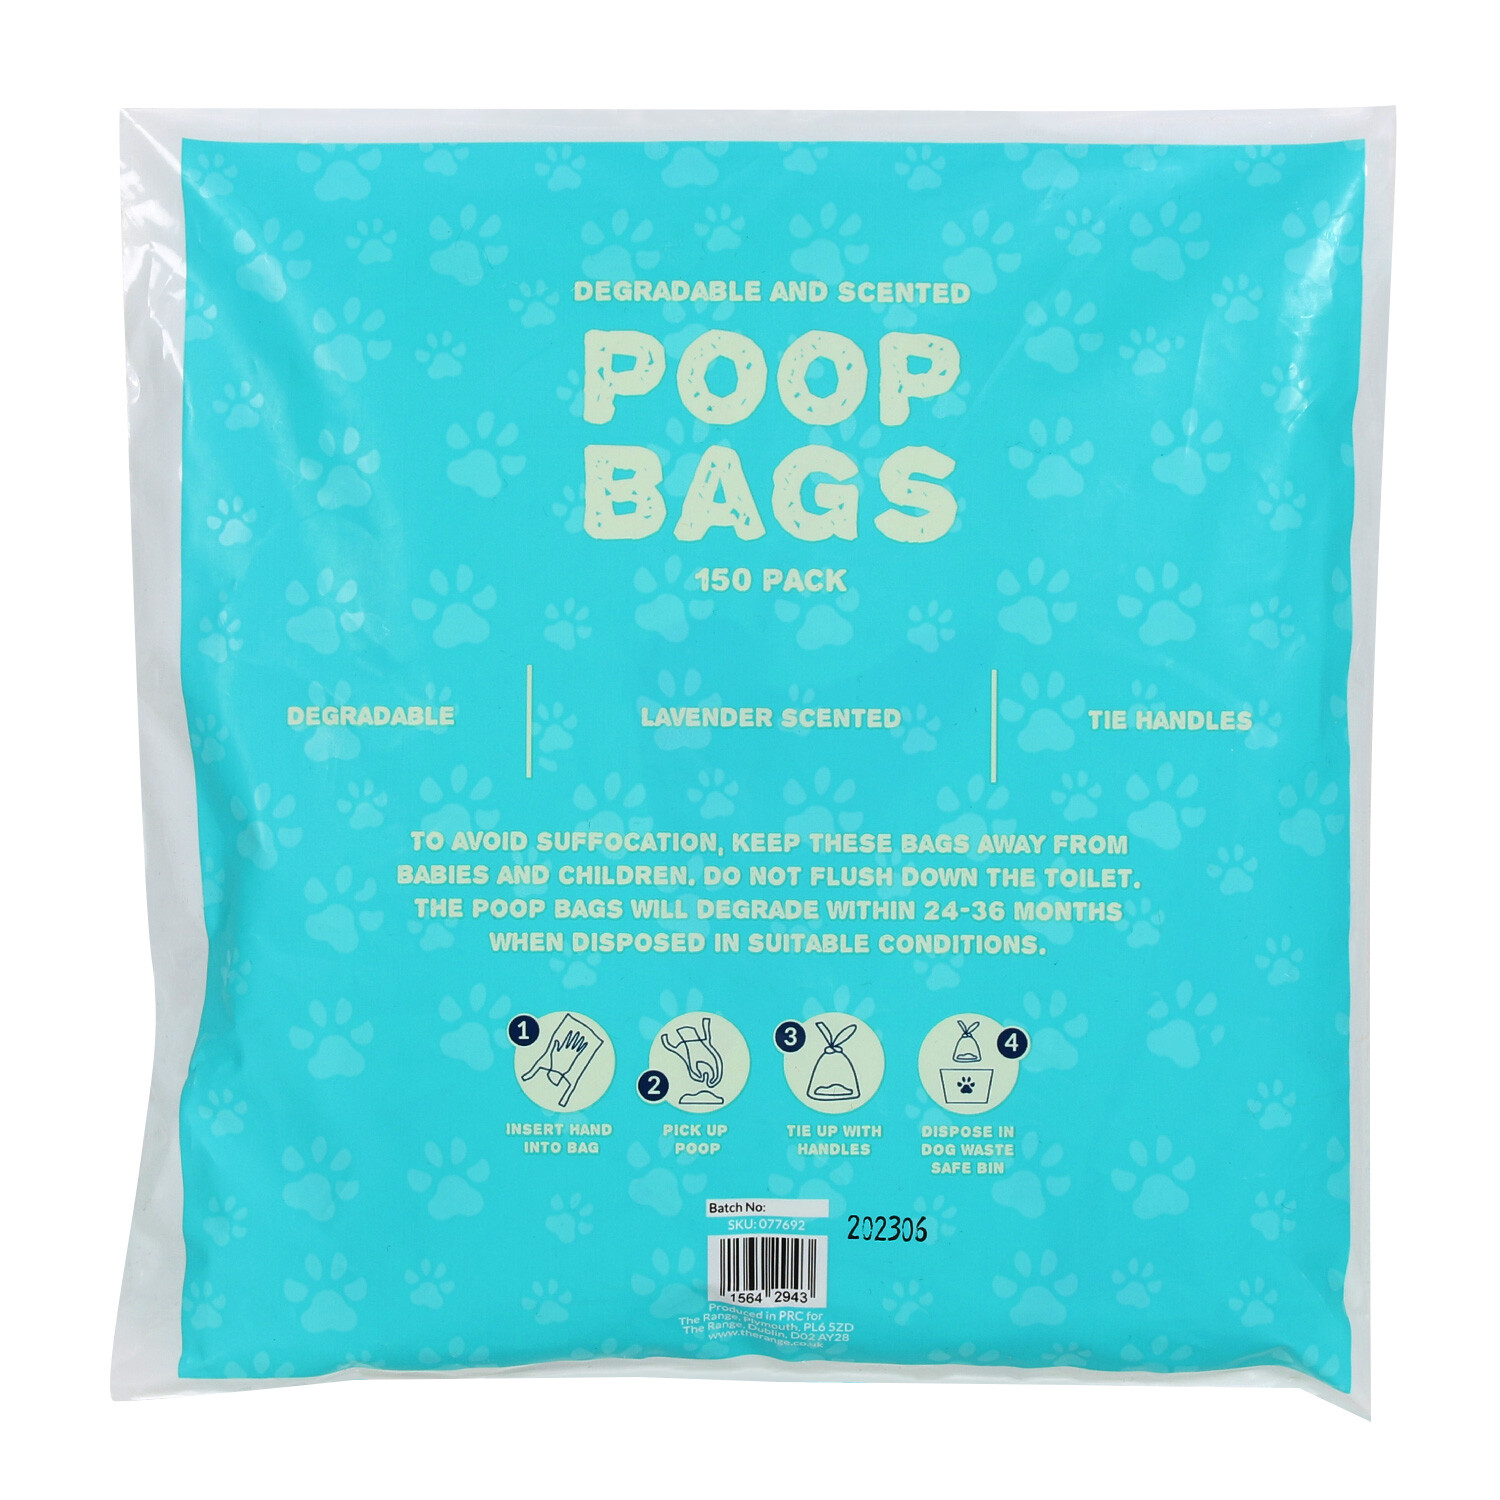 Pack of 150 Degradable Scented Poop Bags Image 2